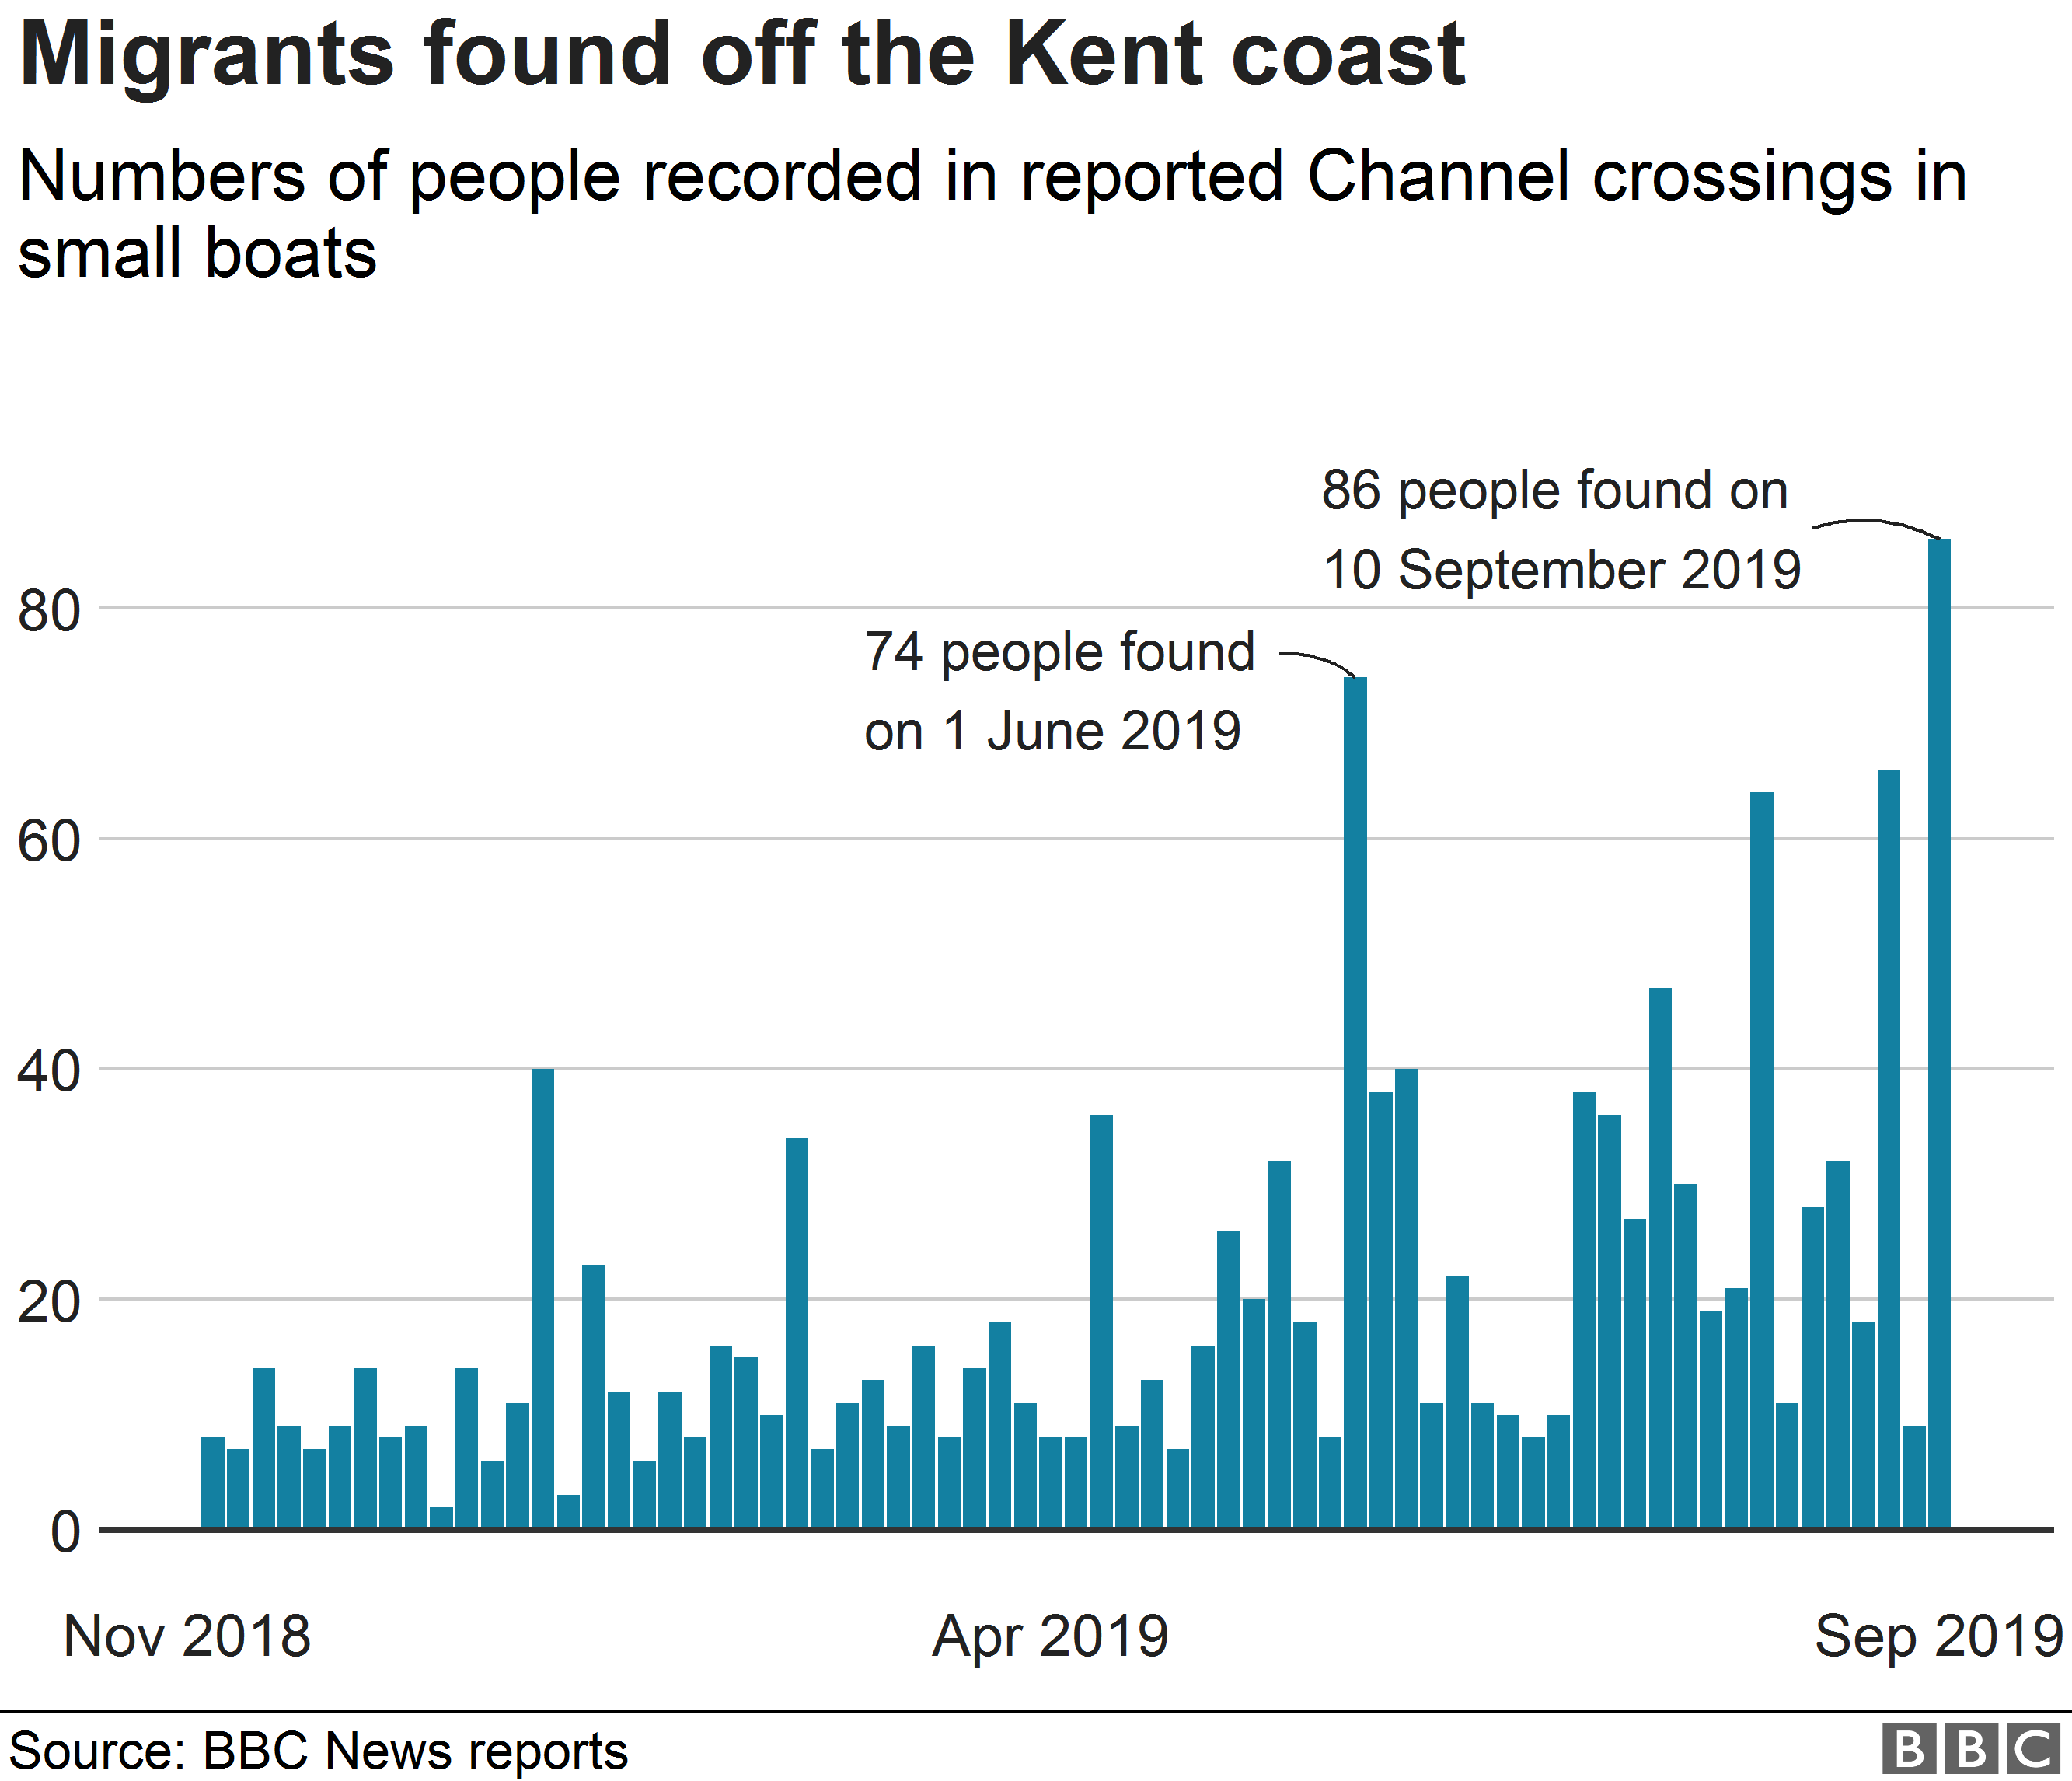 Chart showing numbers of migrants found after crossing the Channel